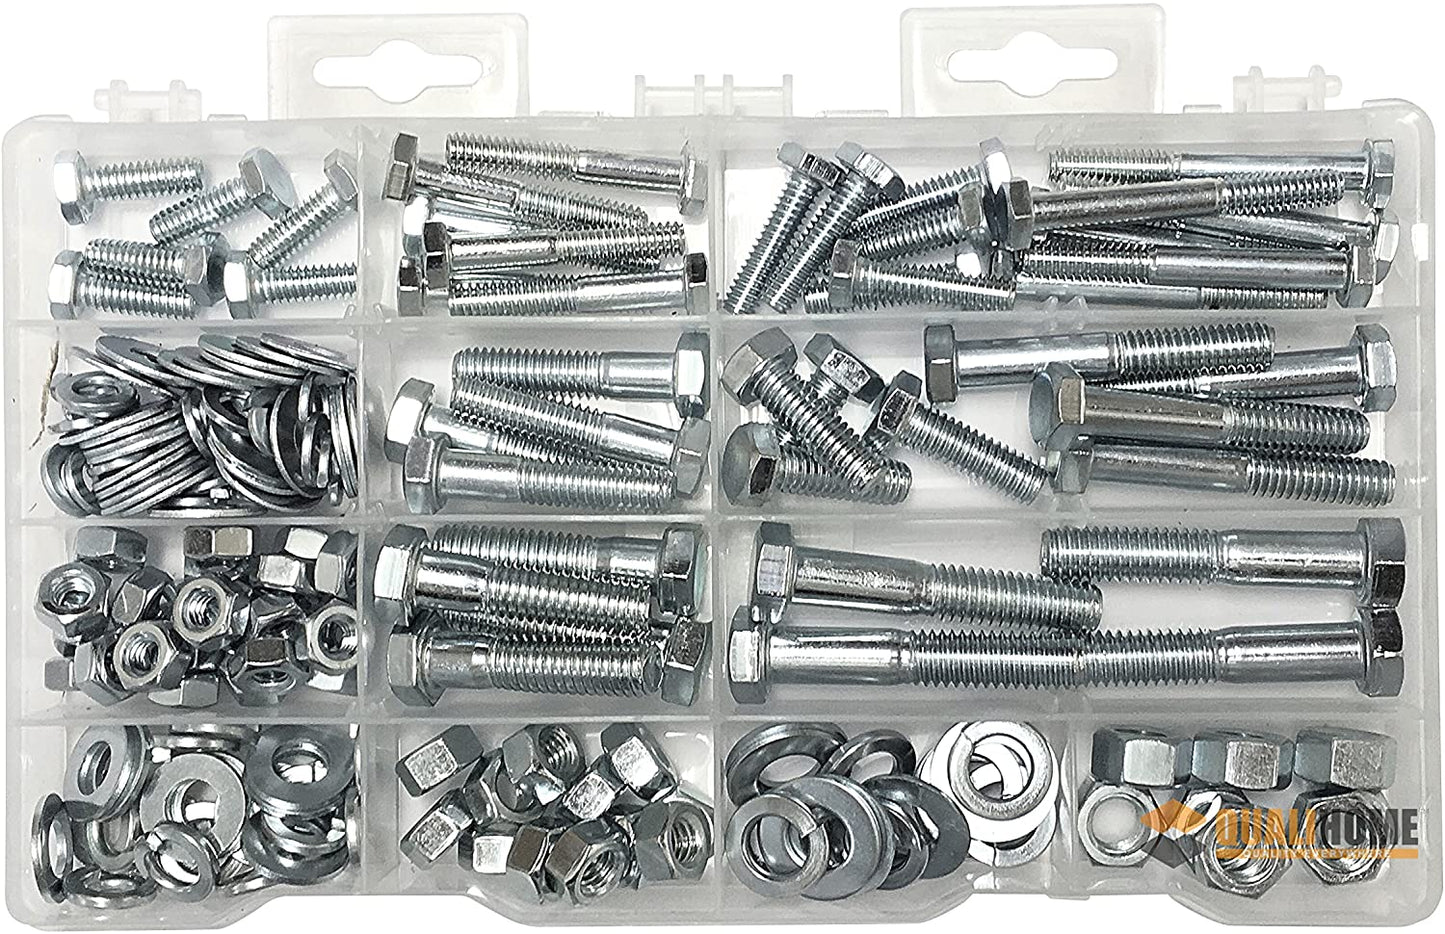 Heavy Duty Nut & Bolt Assortment Kit, 172 Pieces, Includes 9 Most Common Sizes - (For 8 piece(s))